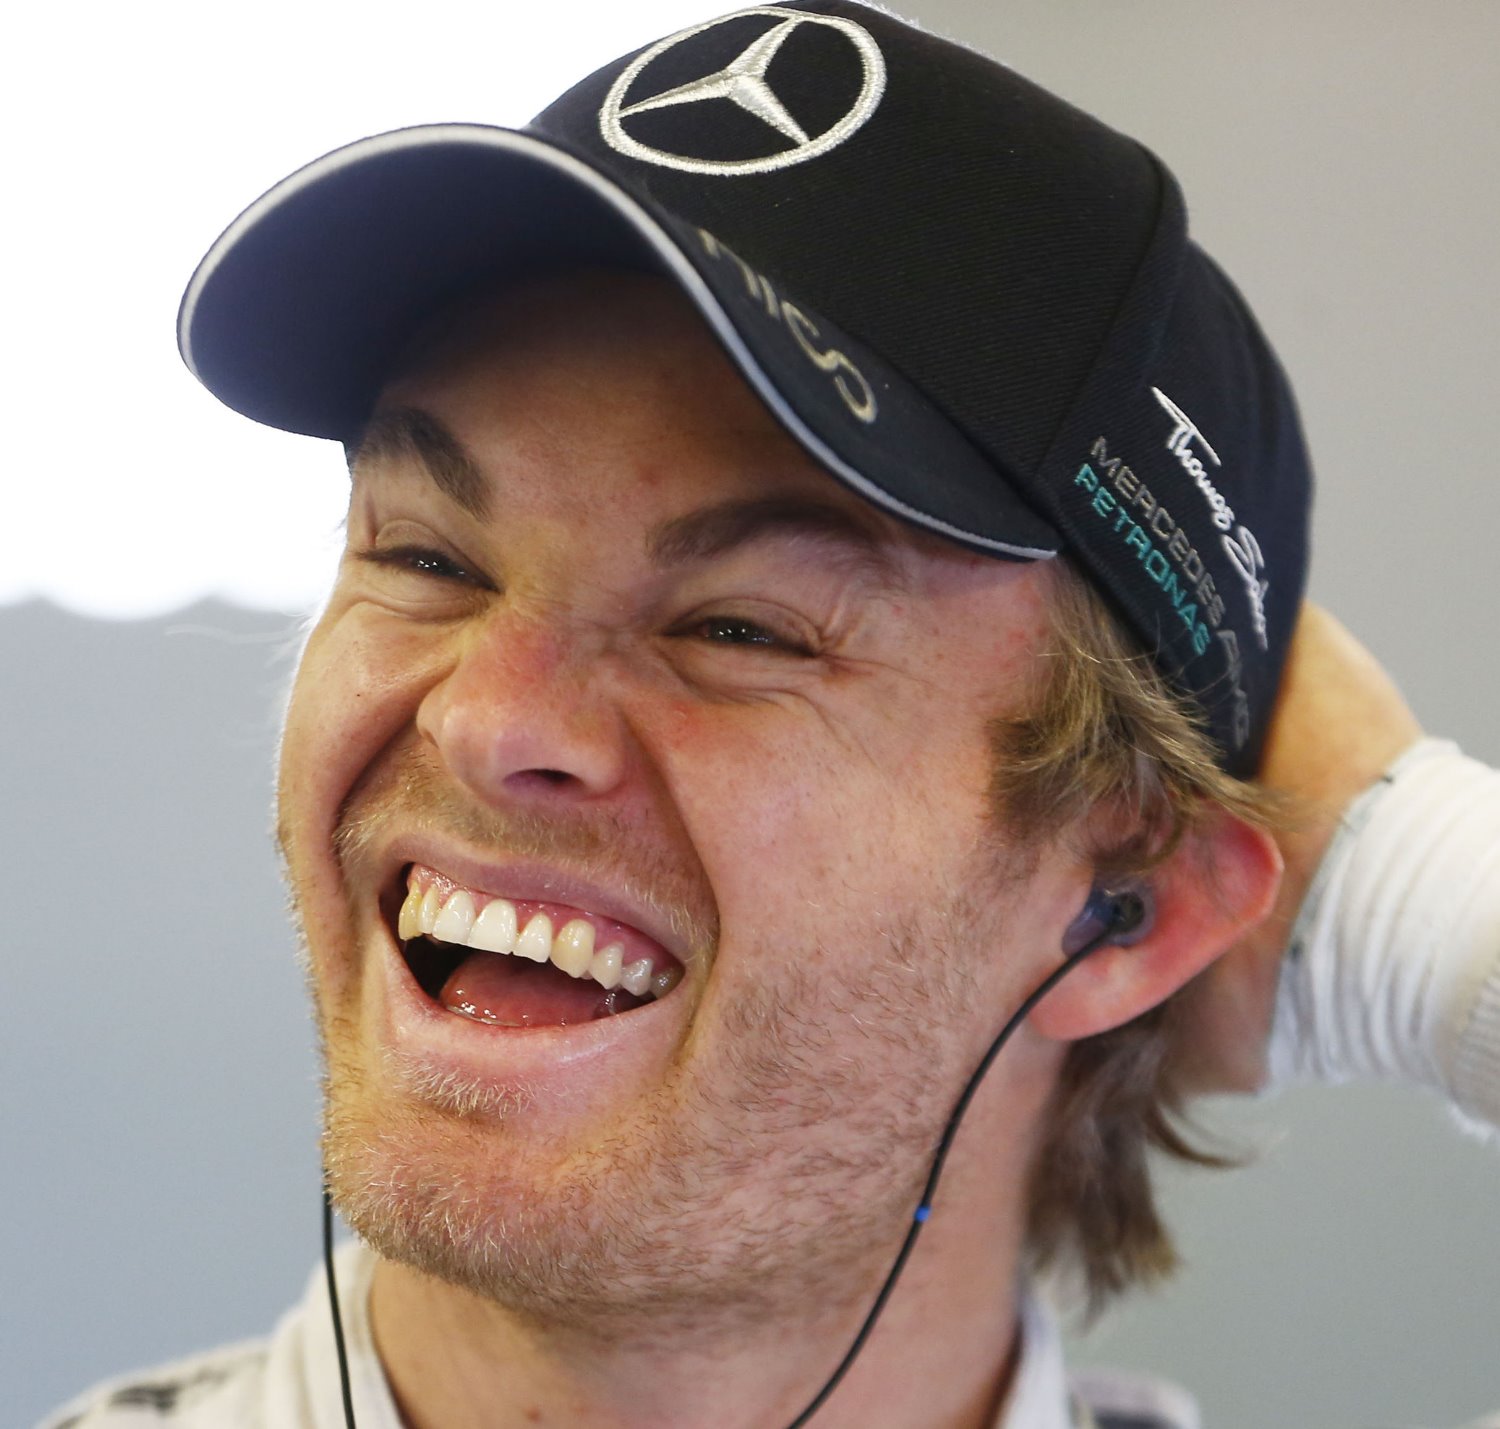 Rosberg knows that Mercedes decides if he will win or not